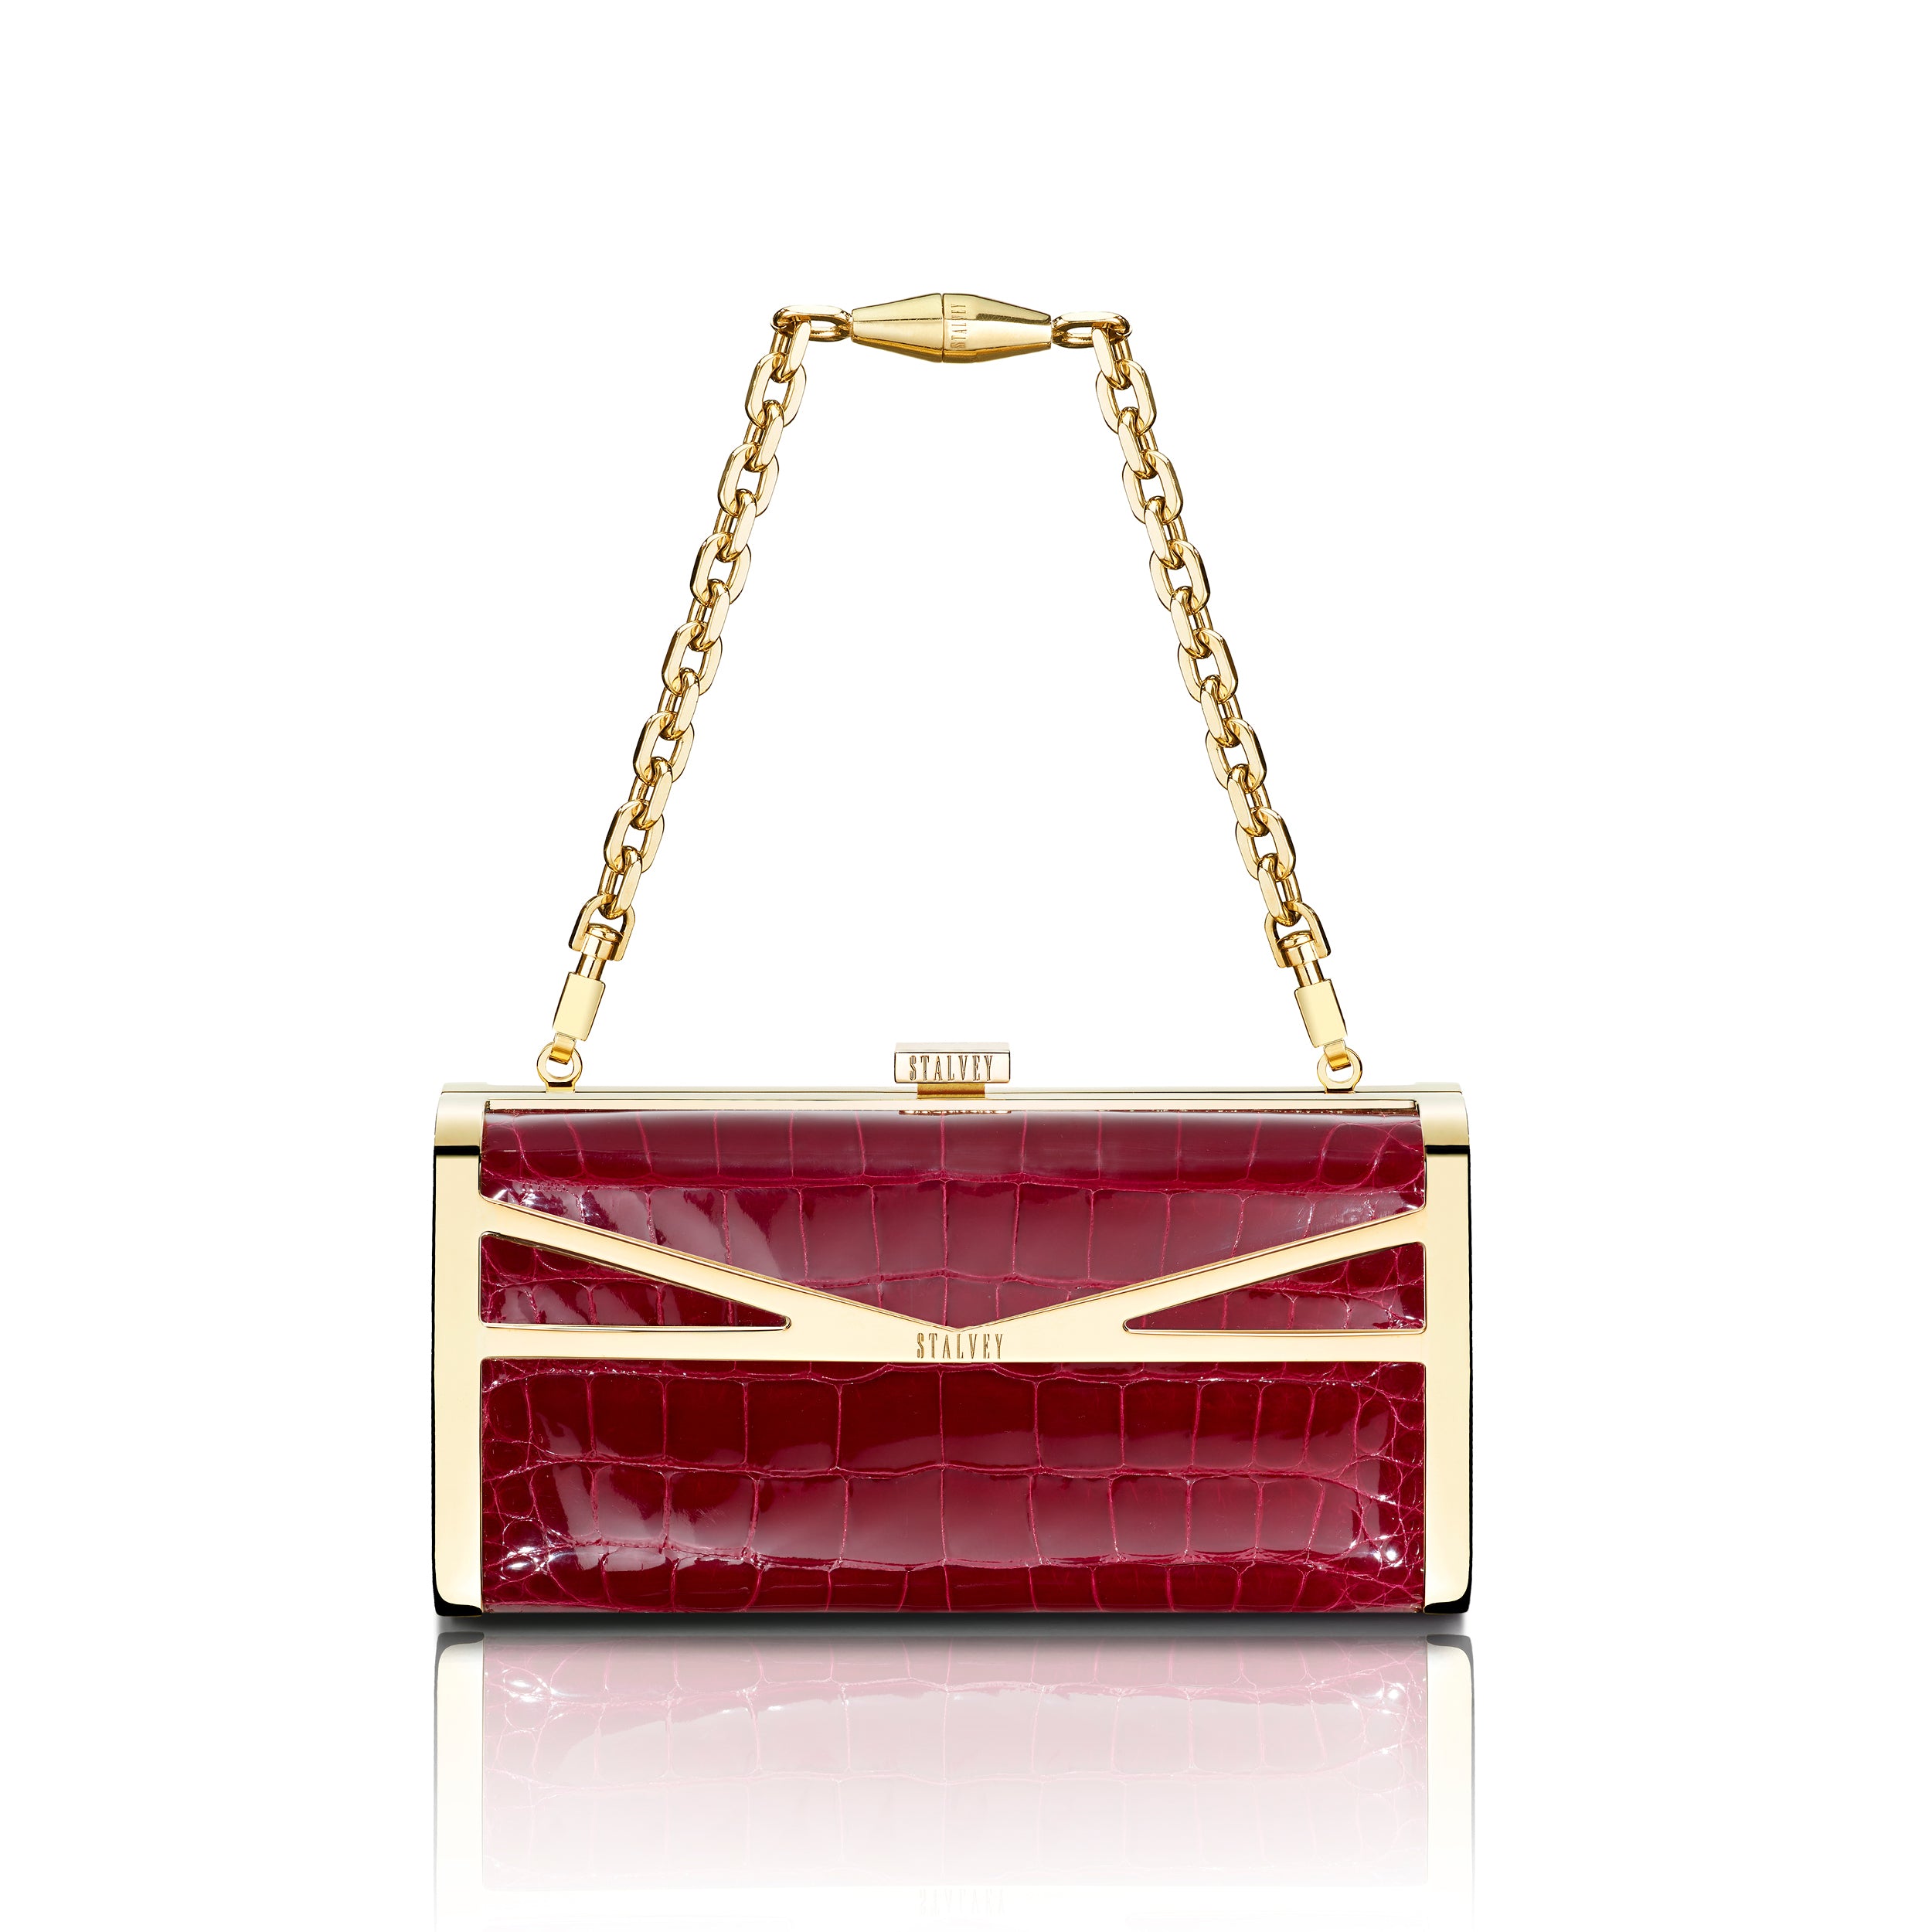 STALVEY Square Clutch in Burgundy Alligator with 24kt Gold Hardware Front View with Chain